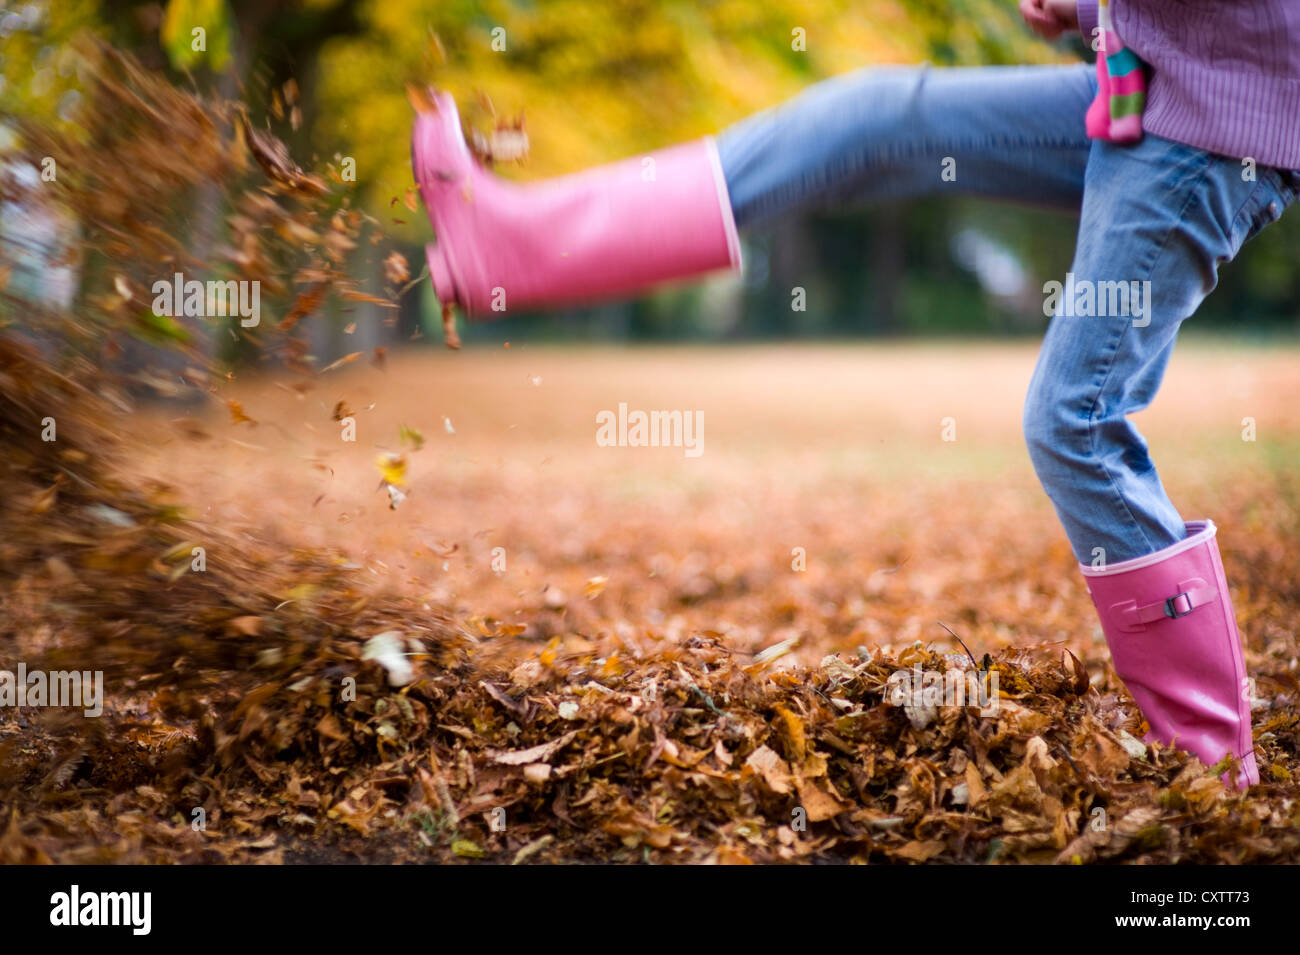 girl in pink gum boots kicking fallen autumn or fall leaves Stock Photo